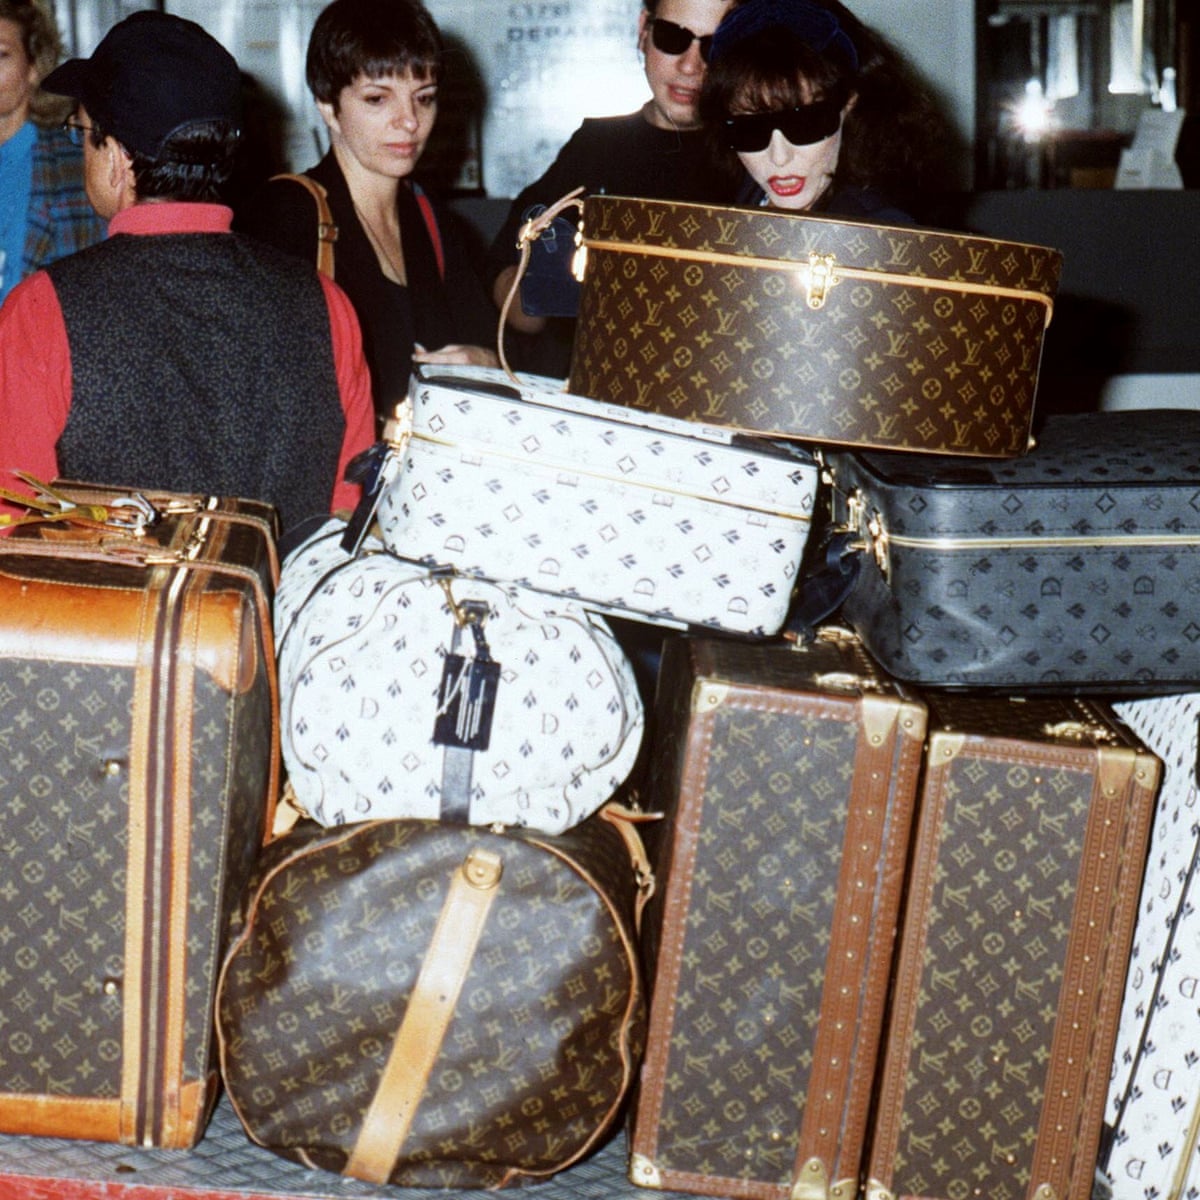 Stylish Women Have Brought One Thing to the Airport for Decades  Louis vuitton  duffle bag, Louis vuitton, Louis vuitton luggage